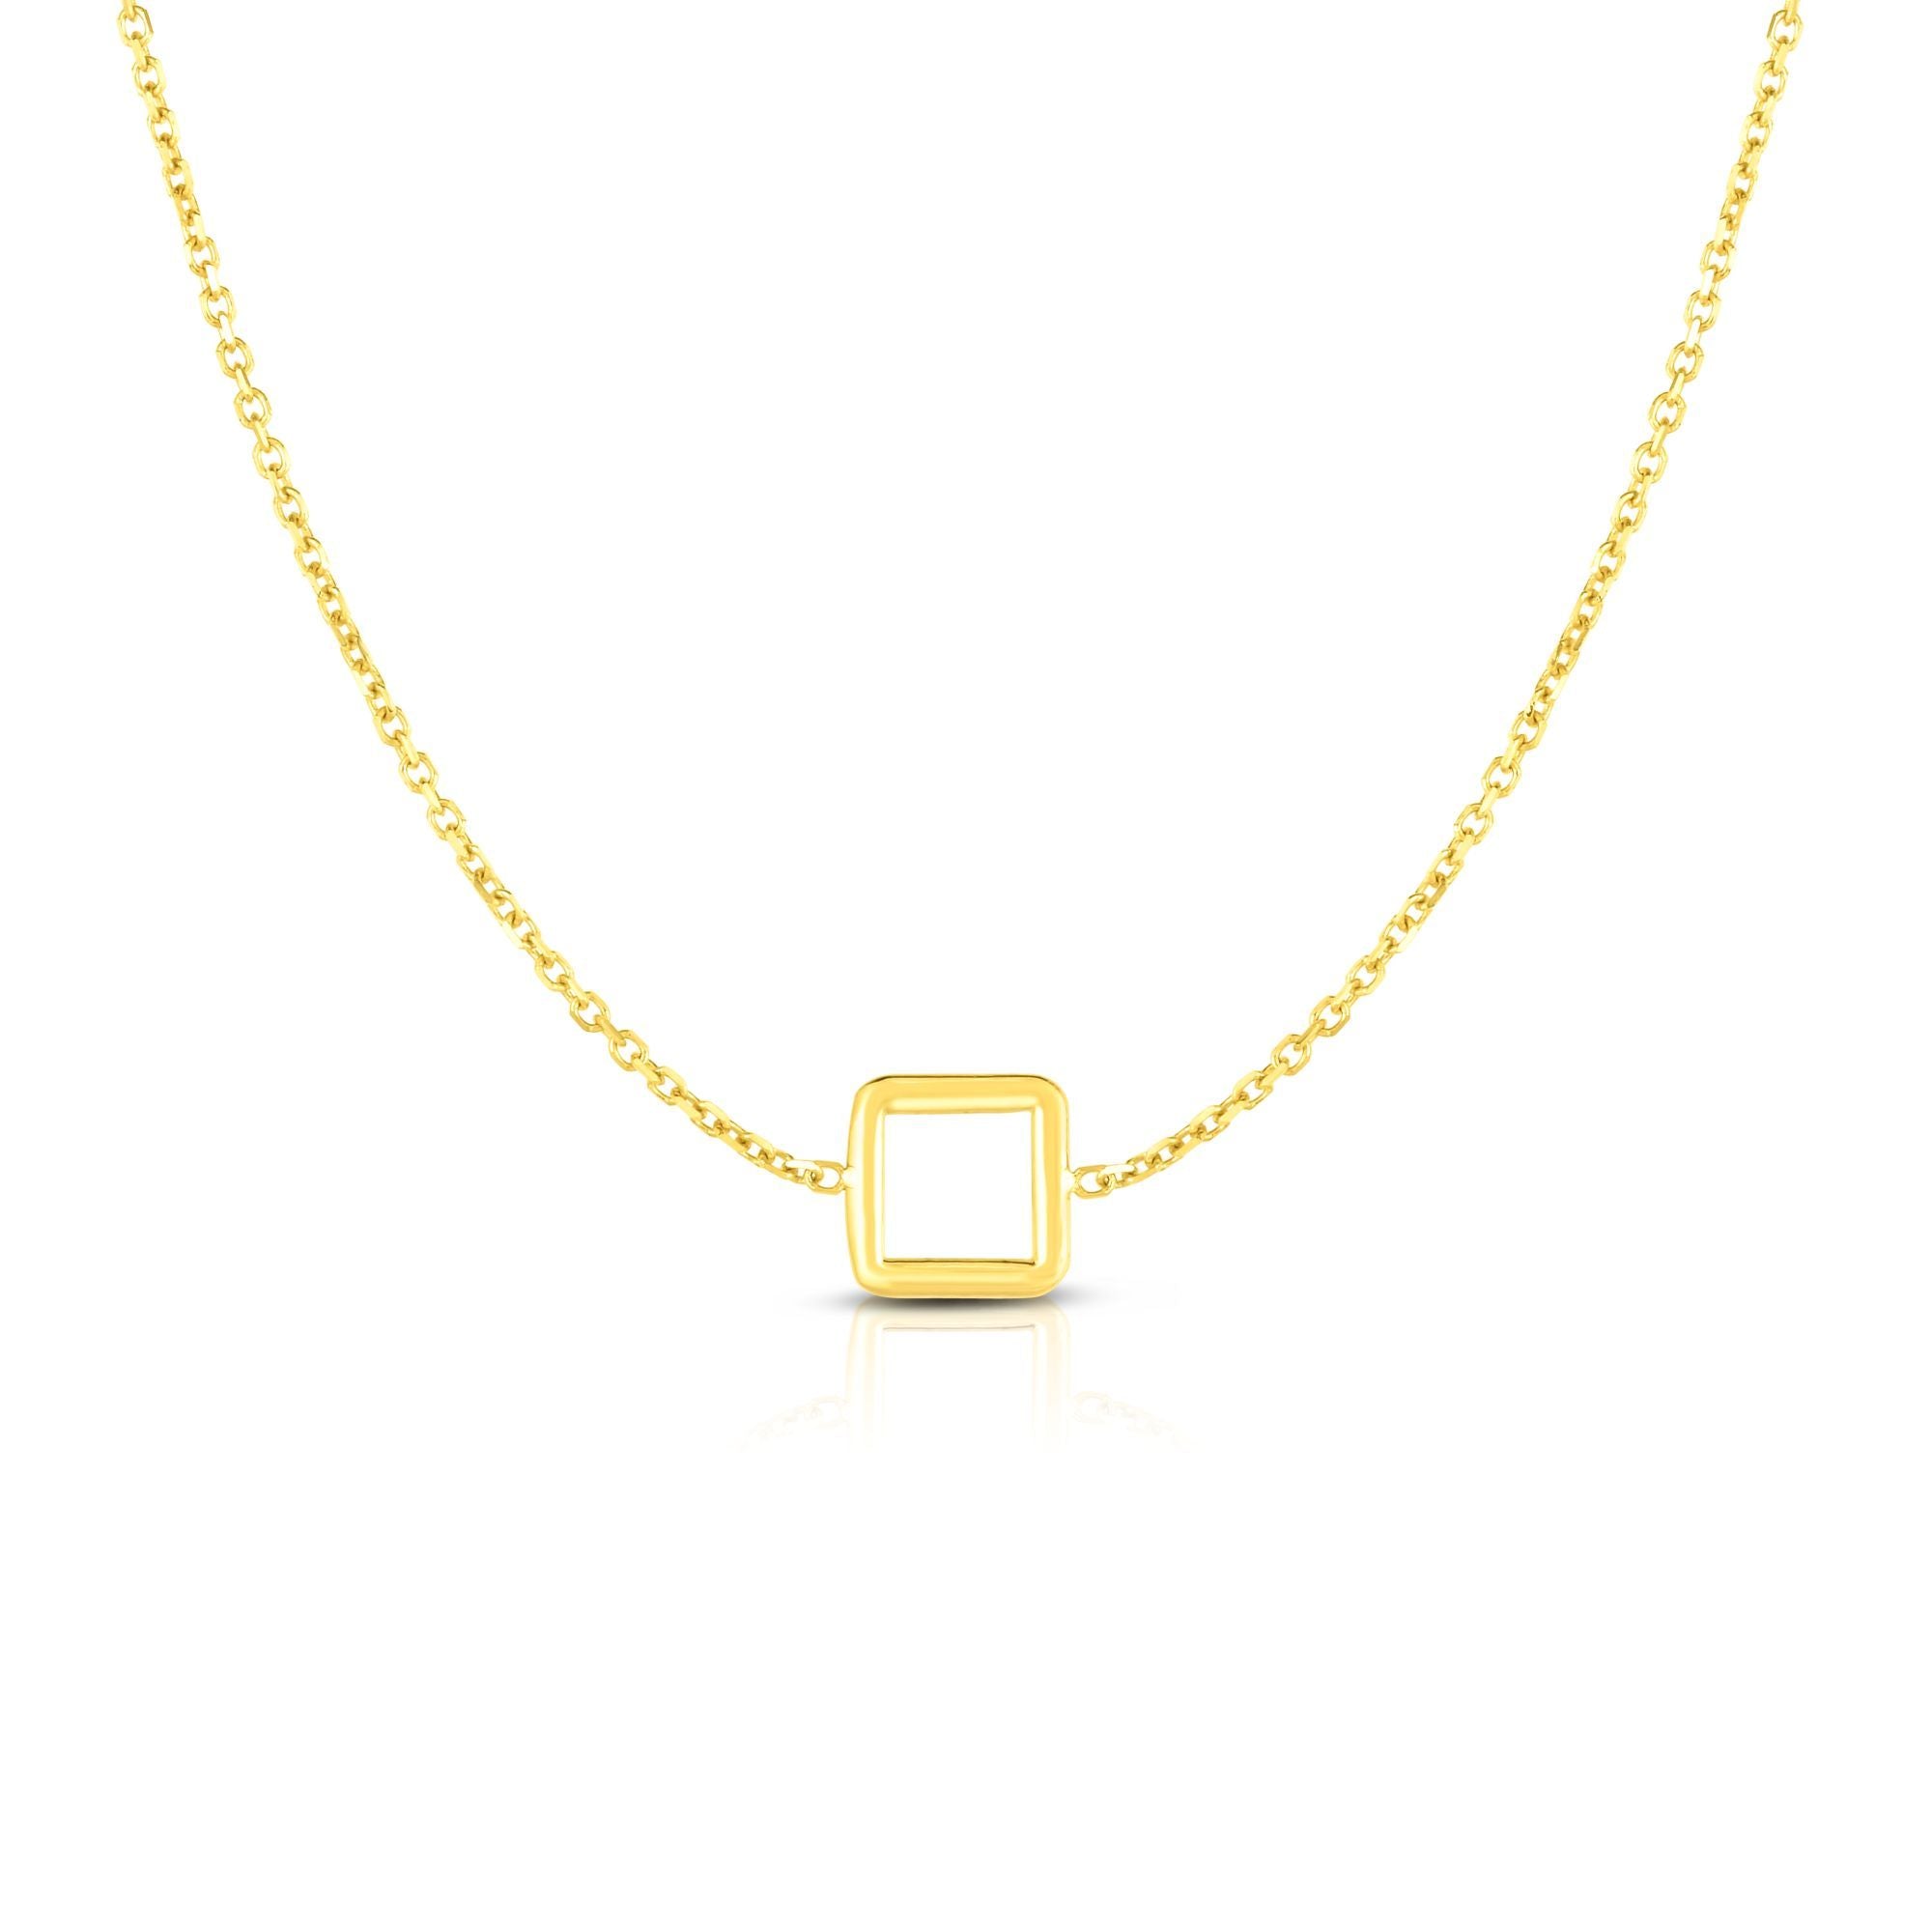 Minimalist Solid Gold Square Necklace or Earrings or Sets made of 14k Solid Yellow Gold - wingroupjewelry